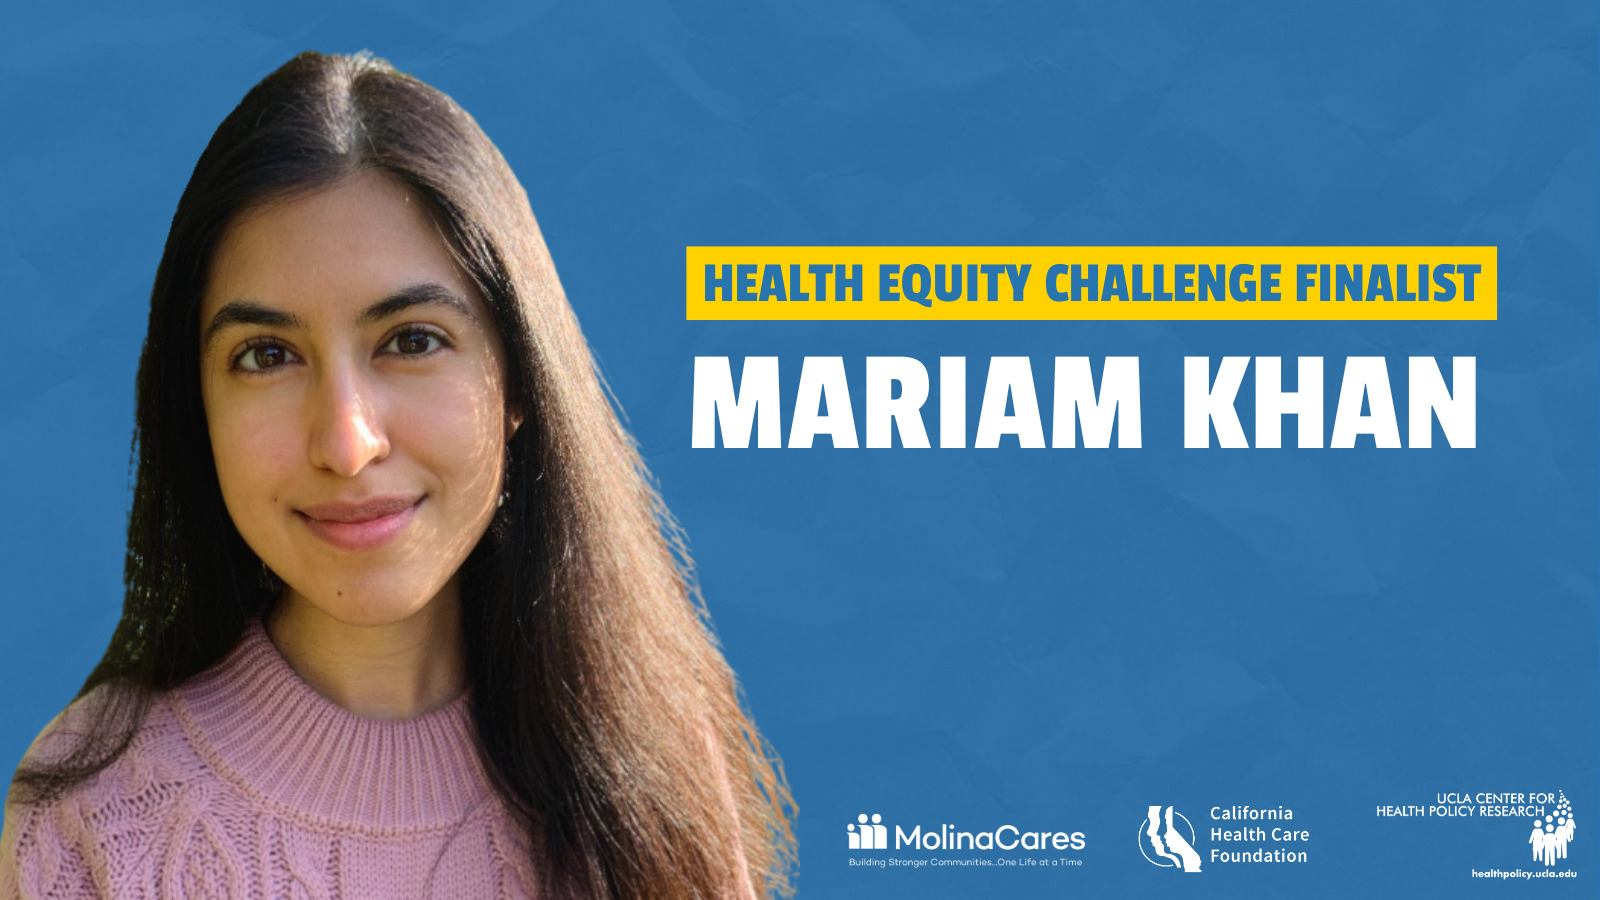 Mariam Khan headshot with health equity challenge banner